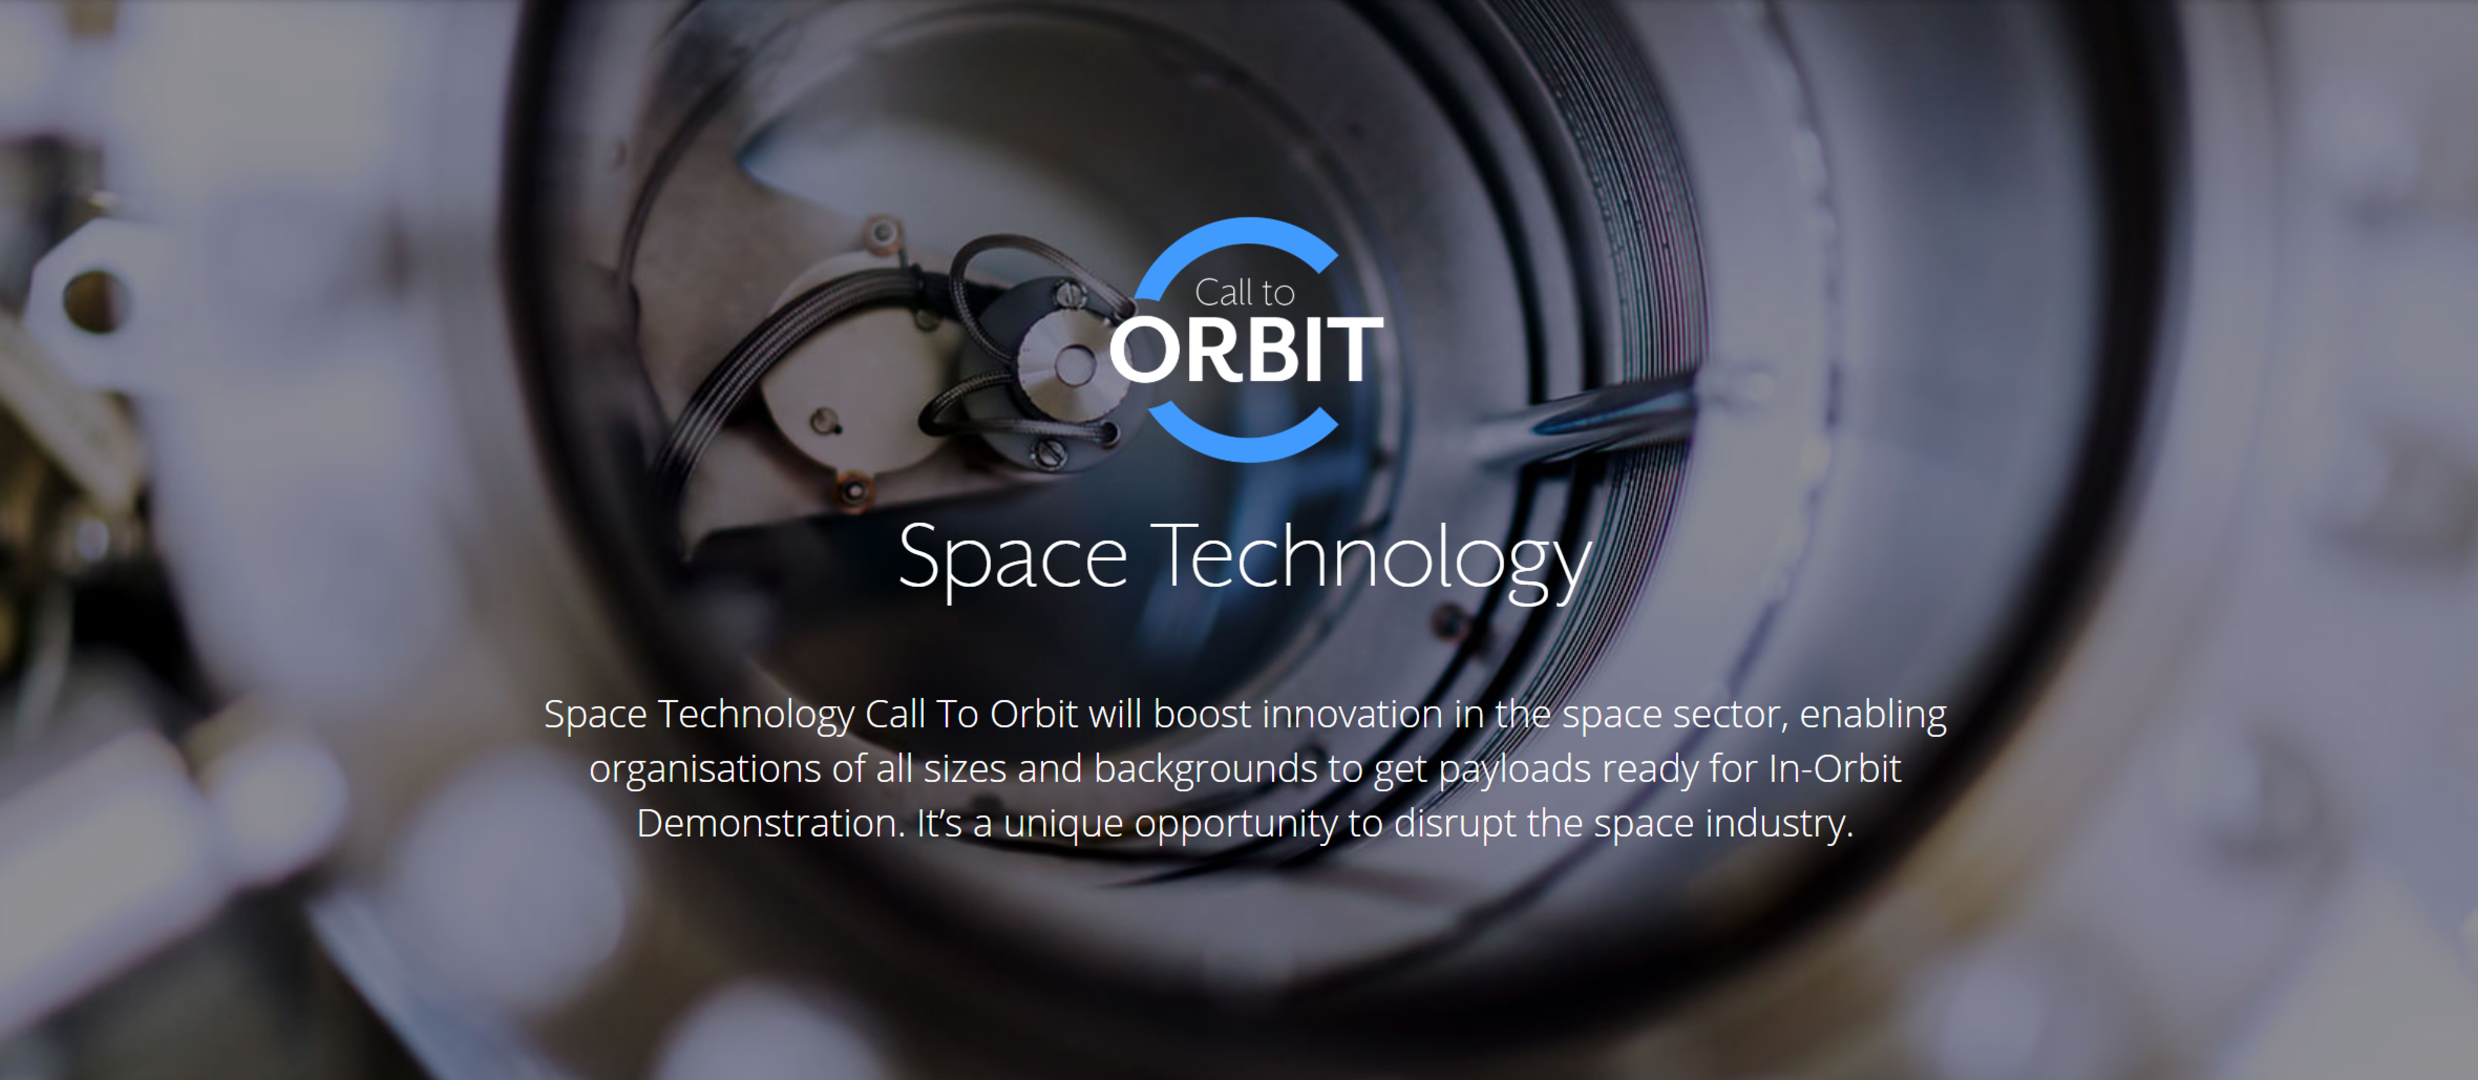 Space Technology Call To Orbit will boost innovation in the space sector